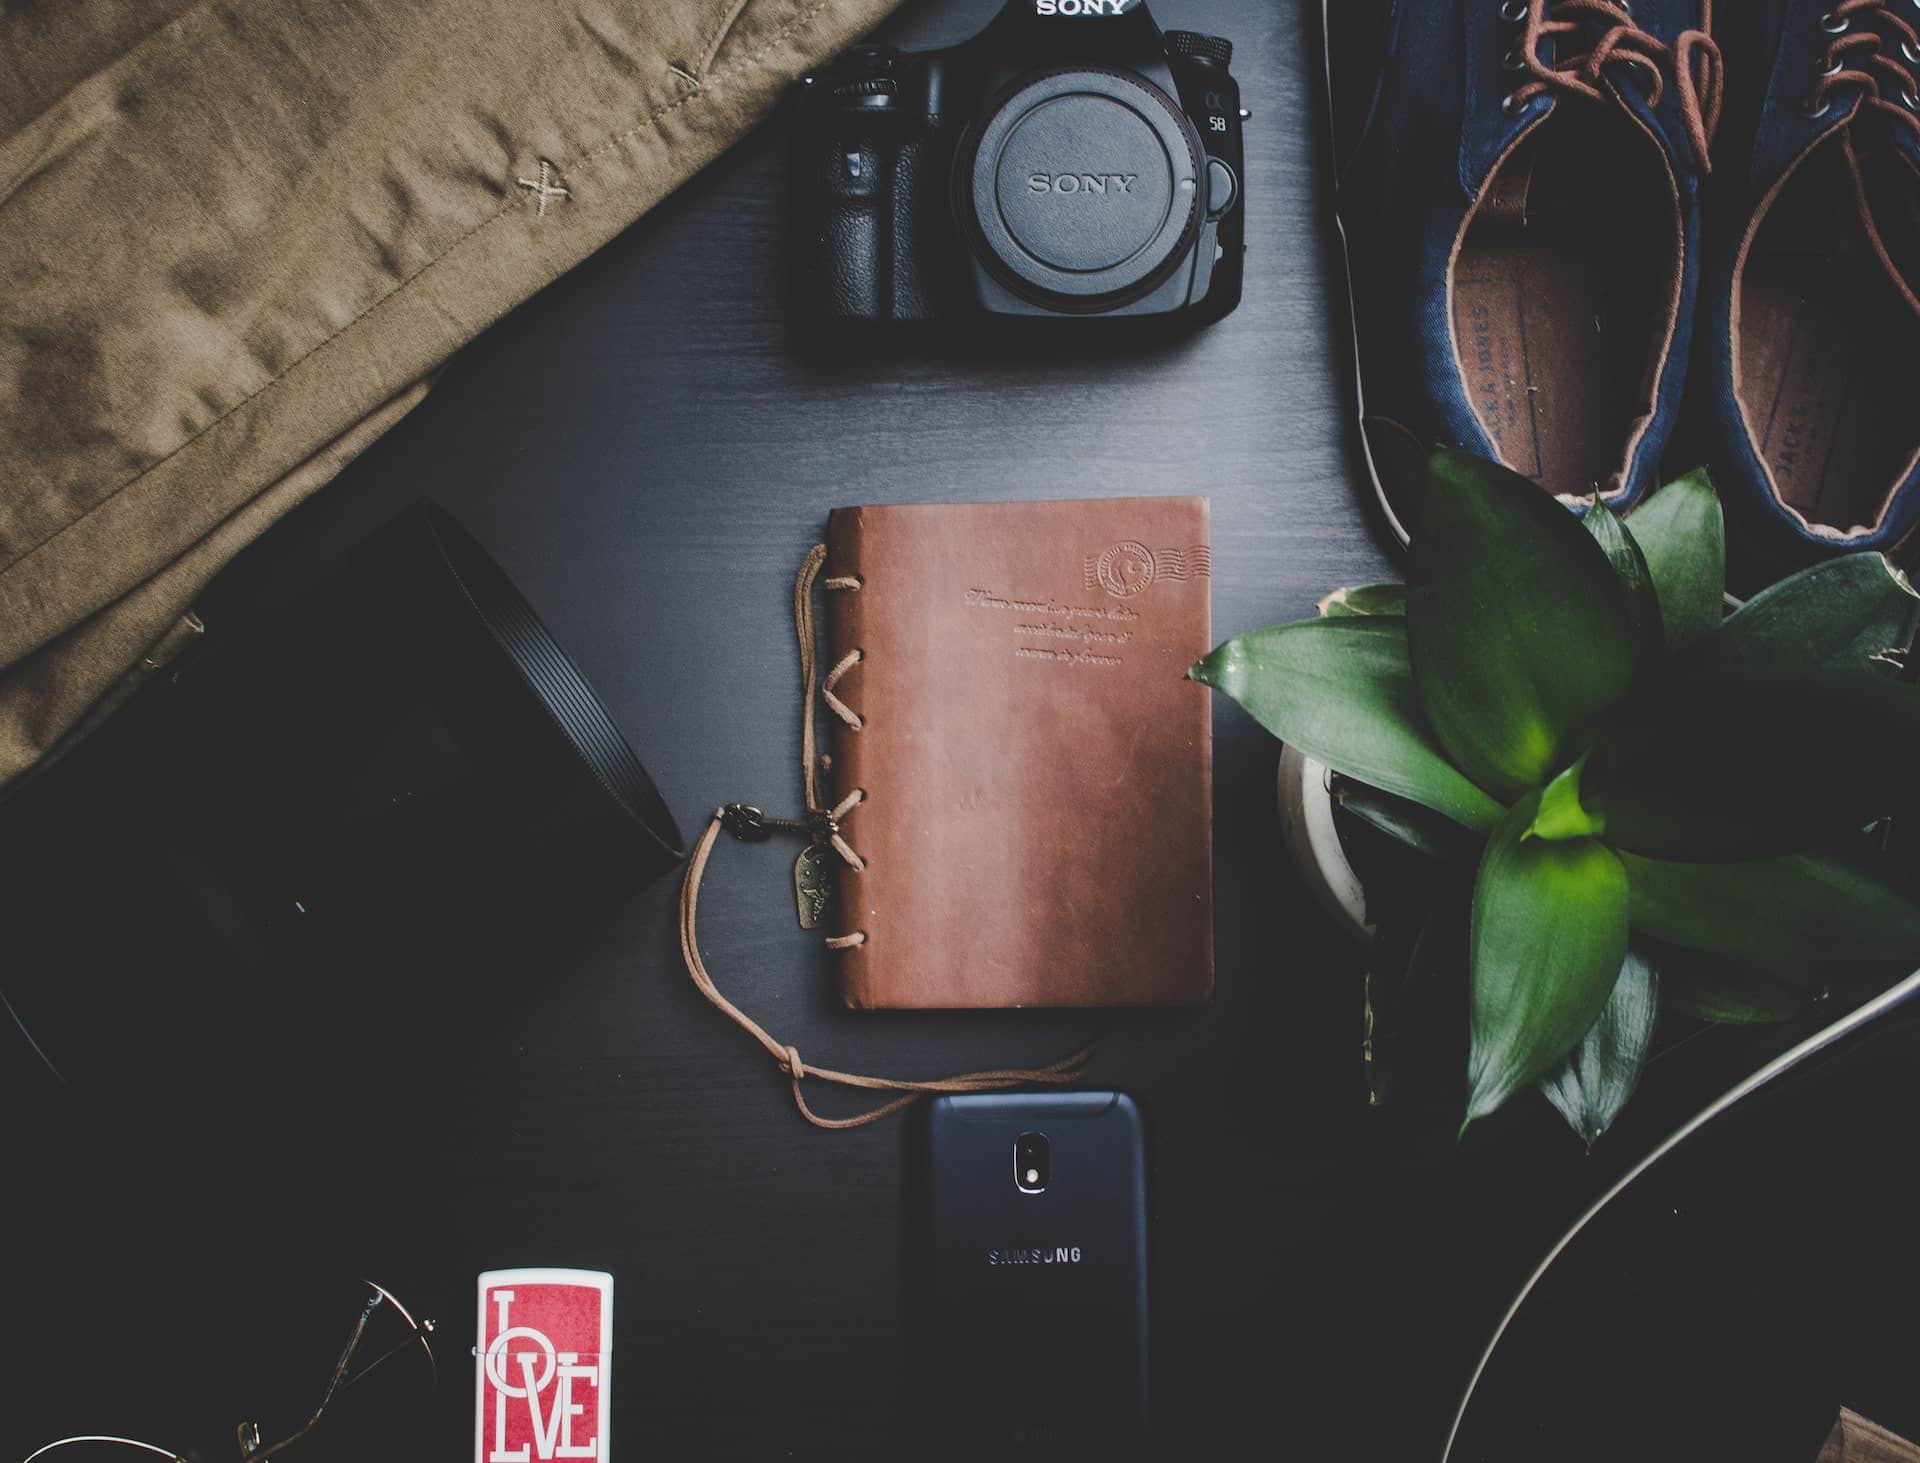 Is it worth buying a camera for travel? Camera, leather journal, lens, smartphone, shoes, sunglasses